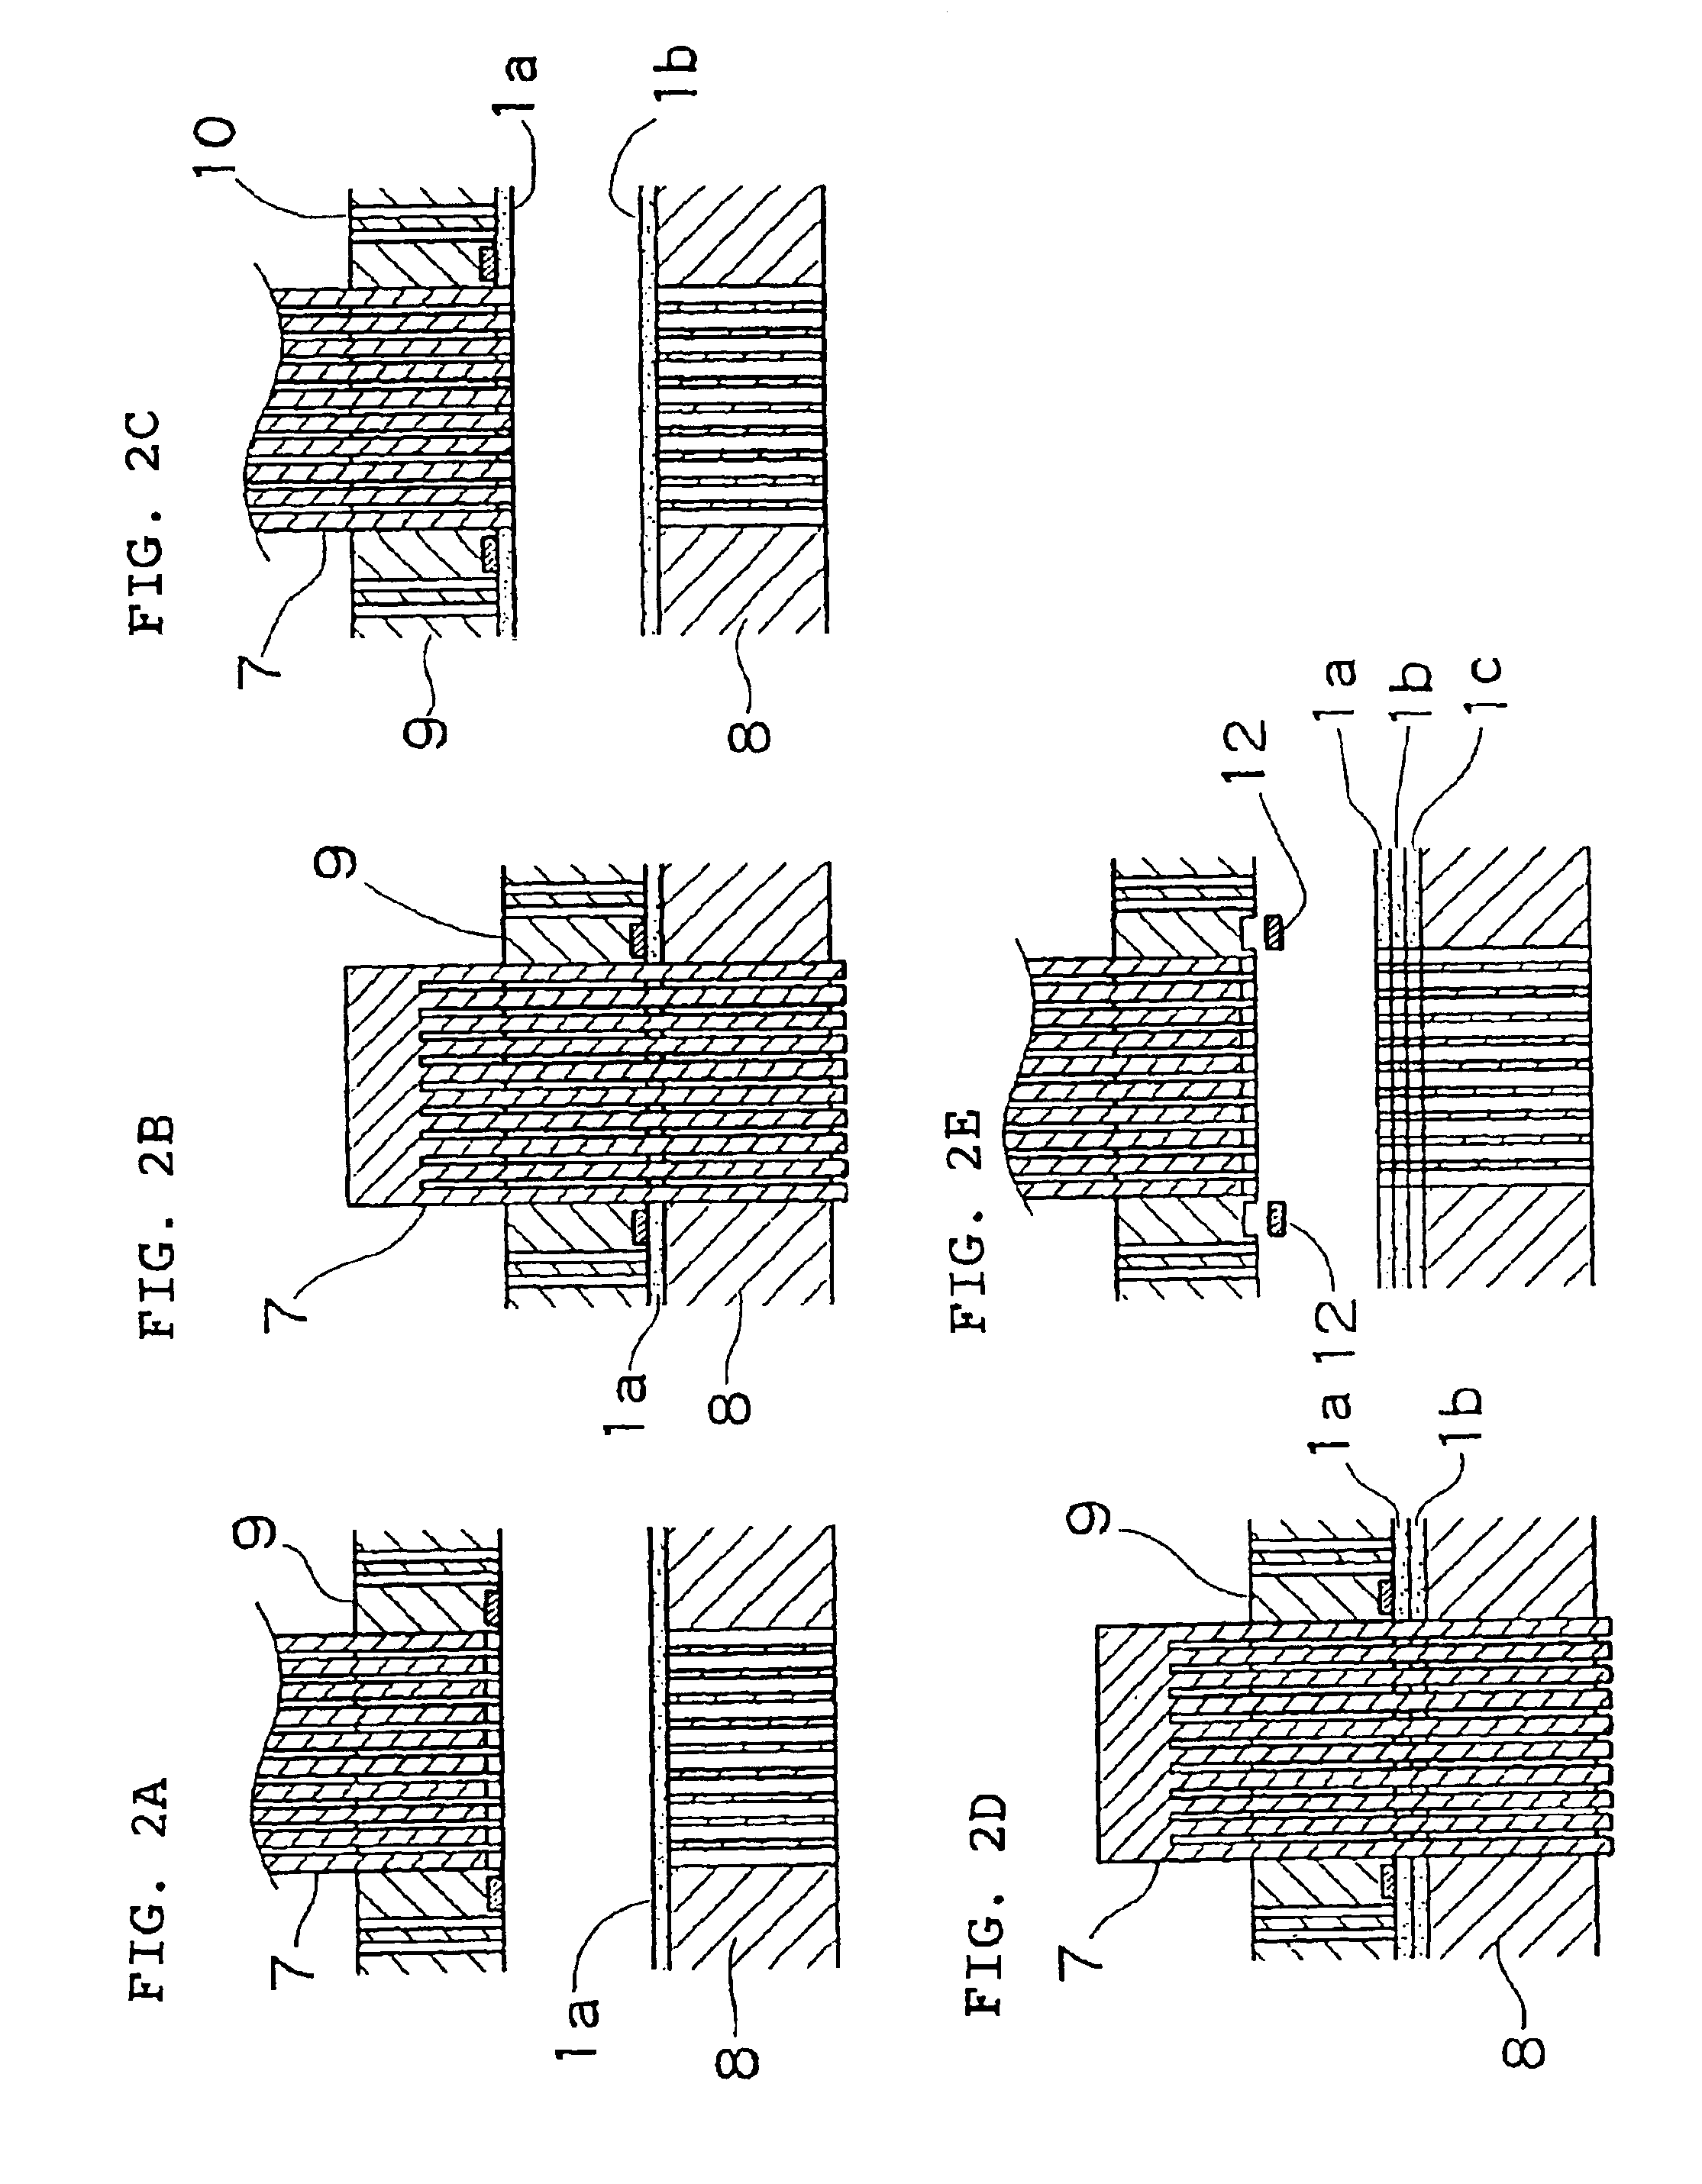 Comb teeth type piezoelectric actuator and method for manufacturing the same